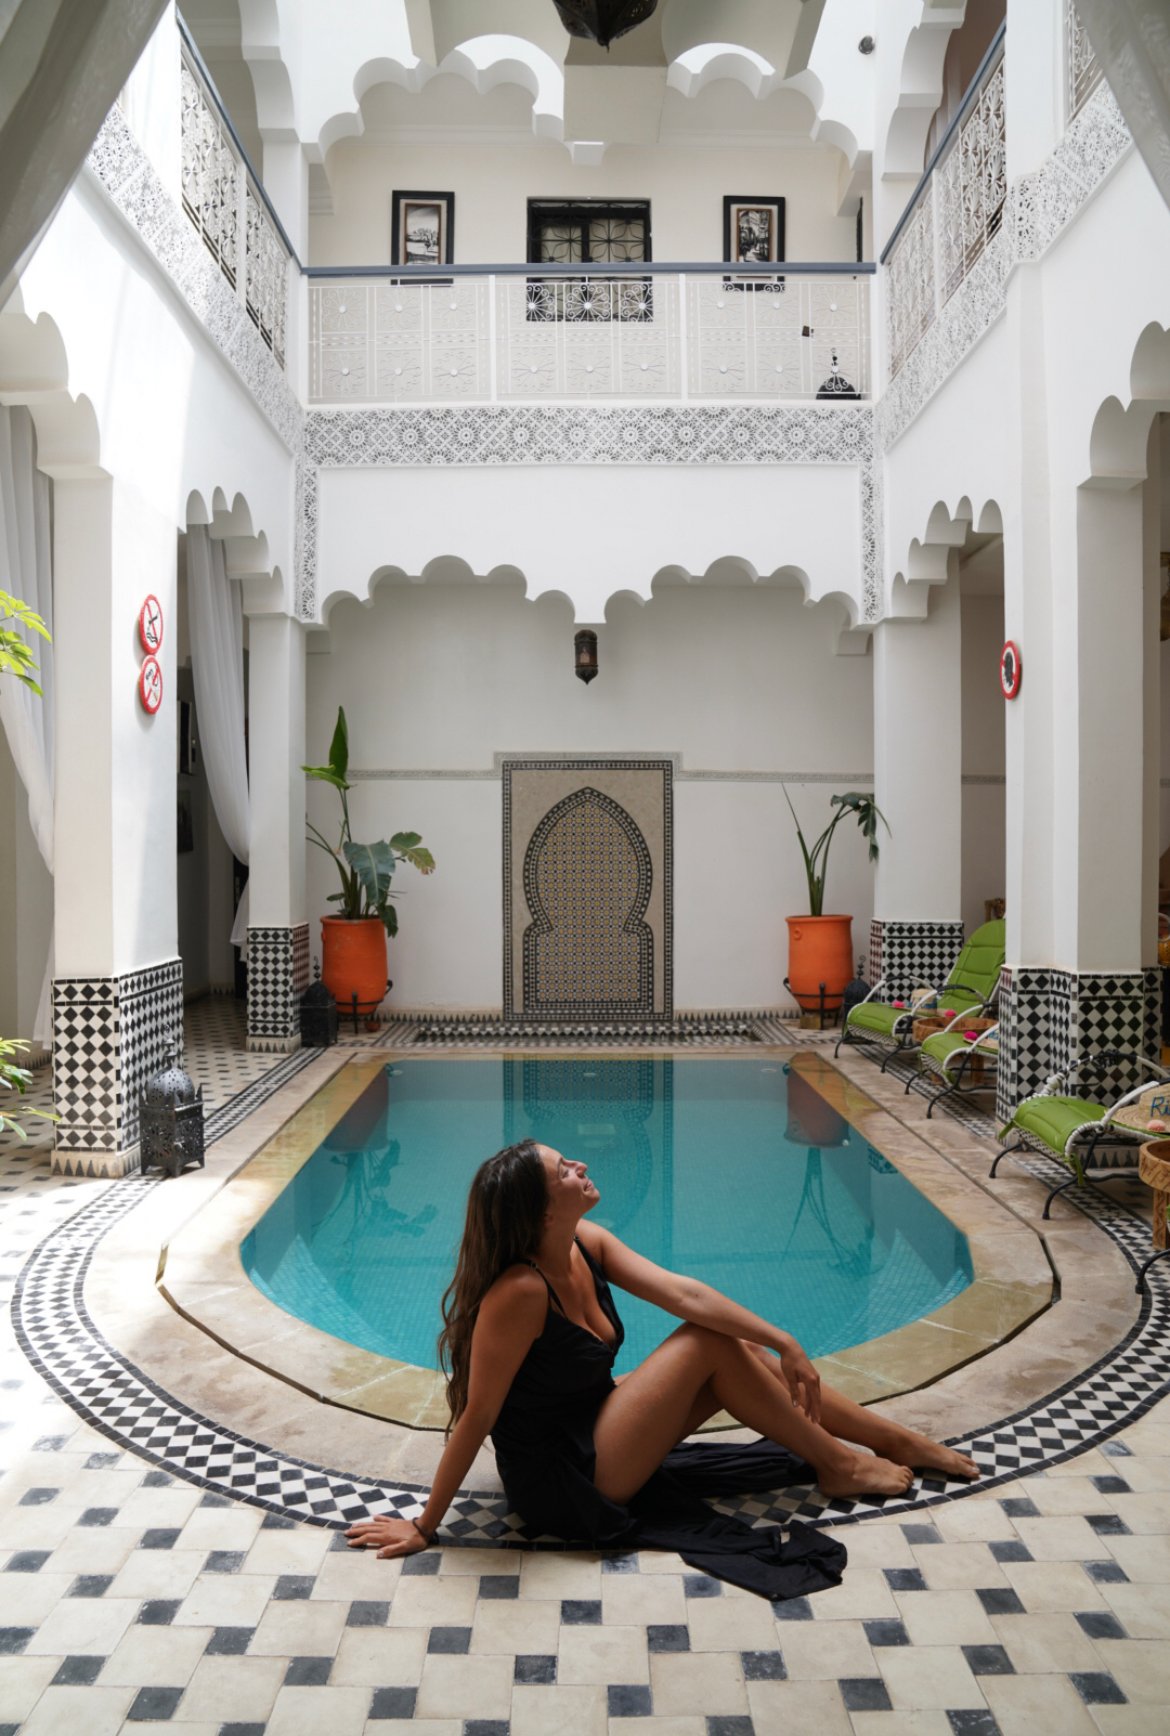 Riad, things to do in Marrakech